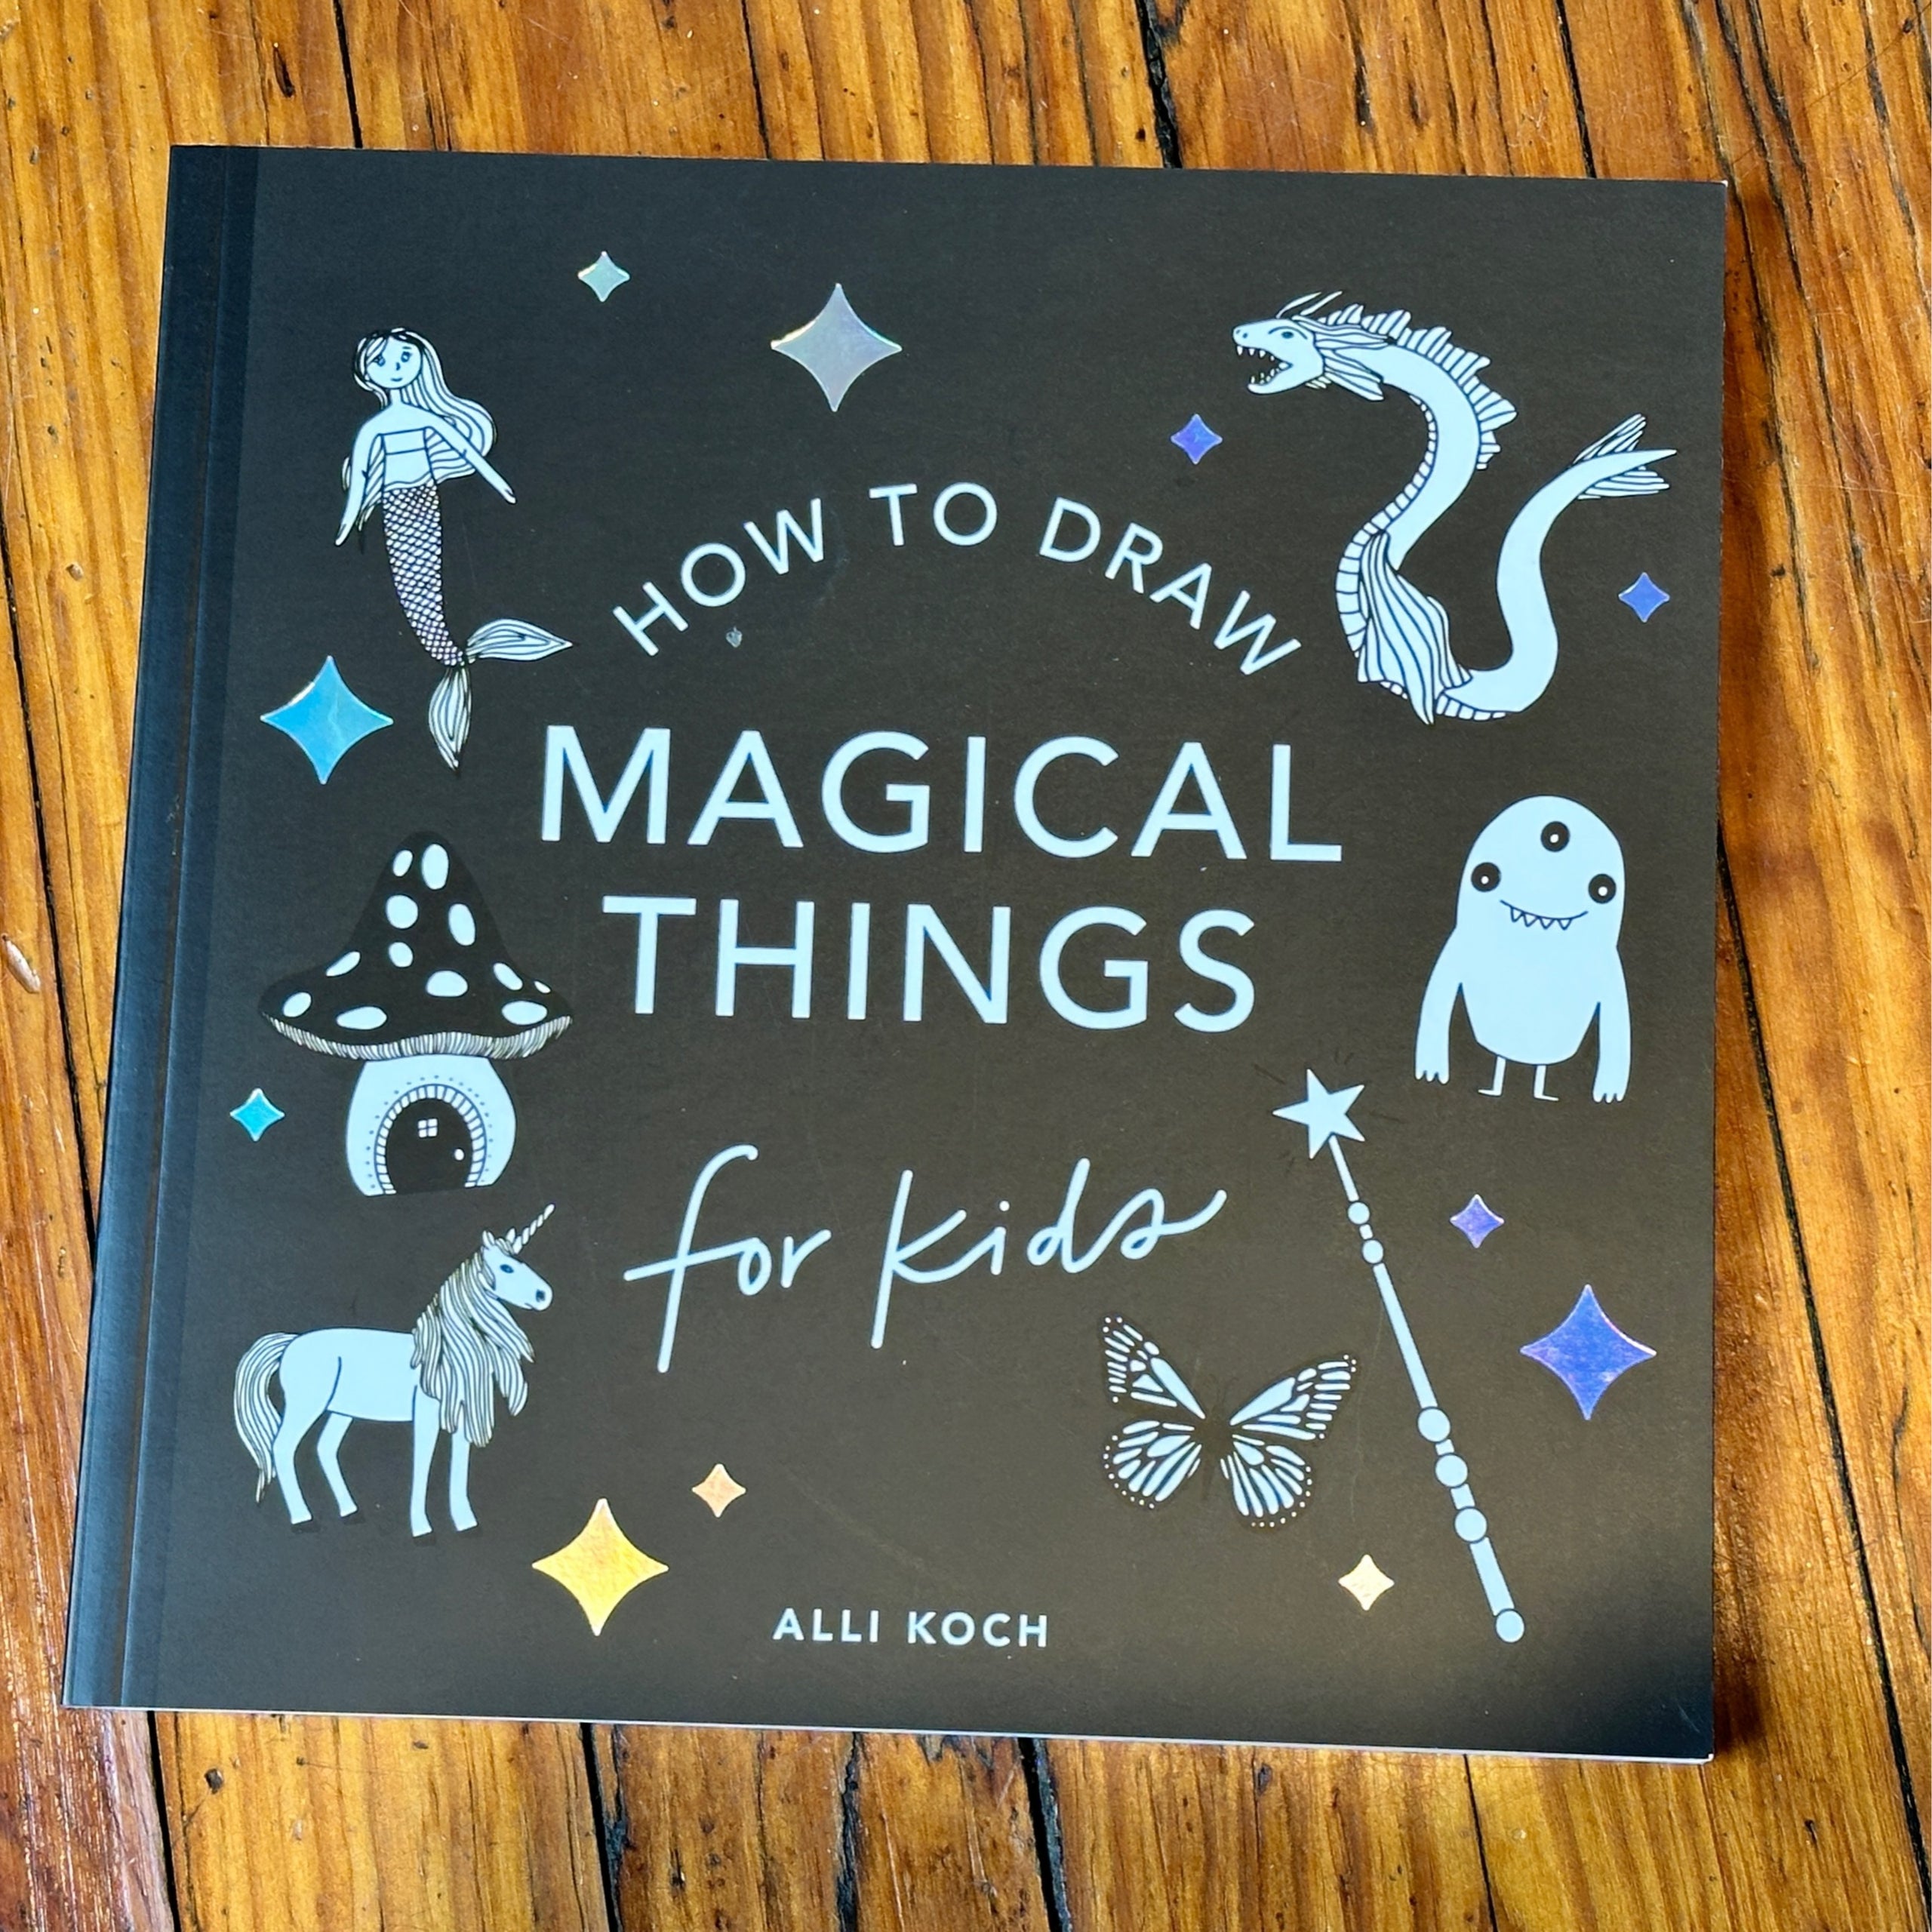 How to Draw Magical Things for Kids by paigetate - Issuu